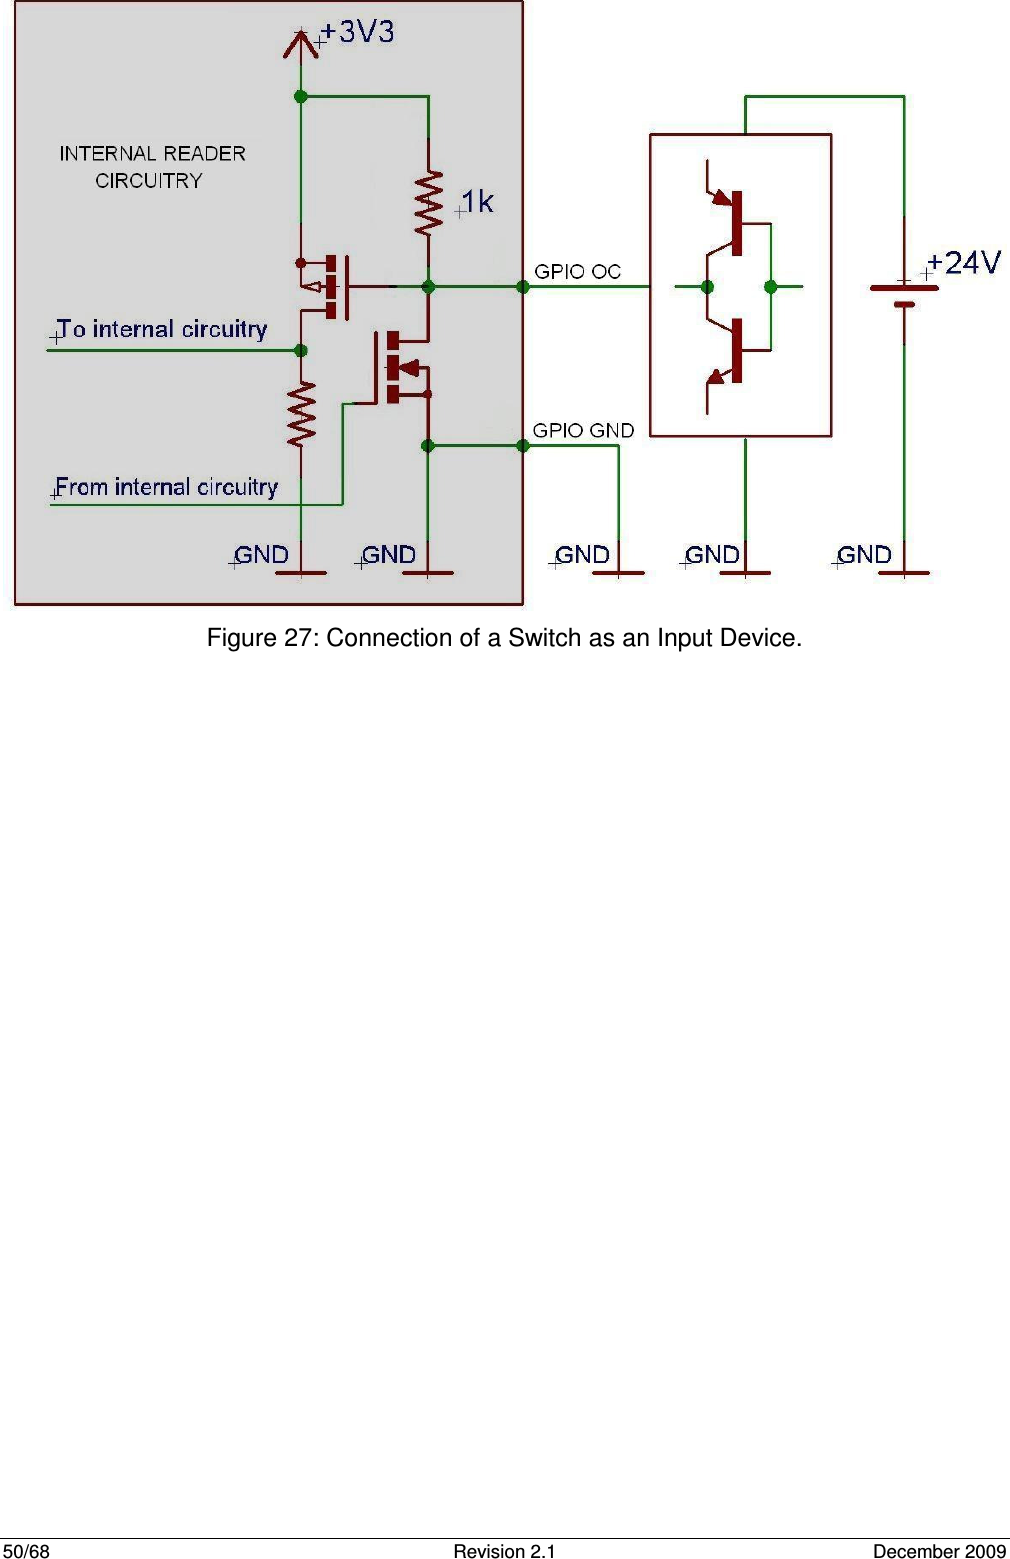  50/68  Revision 2.1  December 2009  Figure 27: Connection of a Switch as an Input Device.  